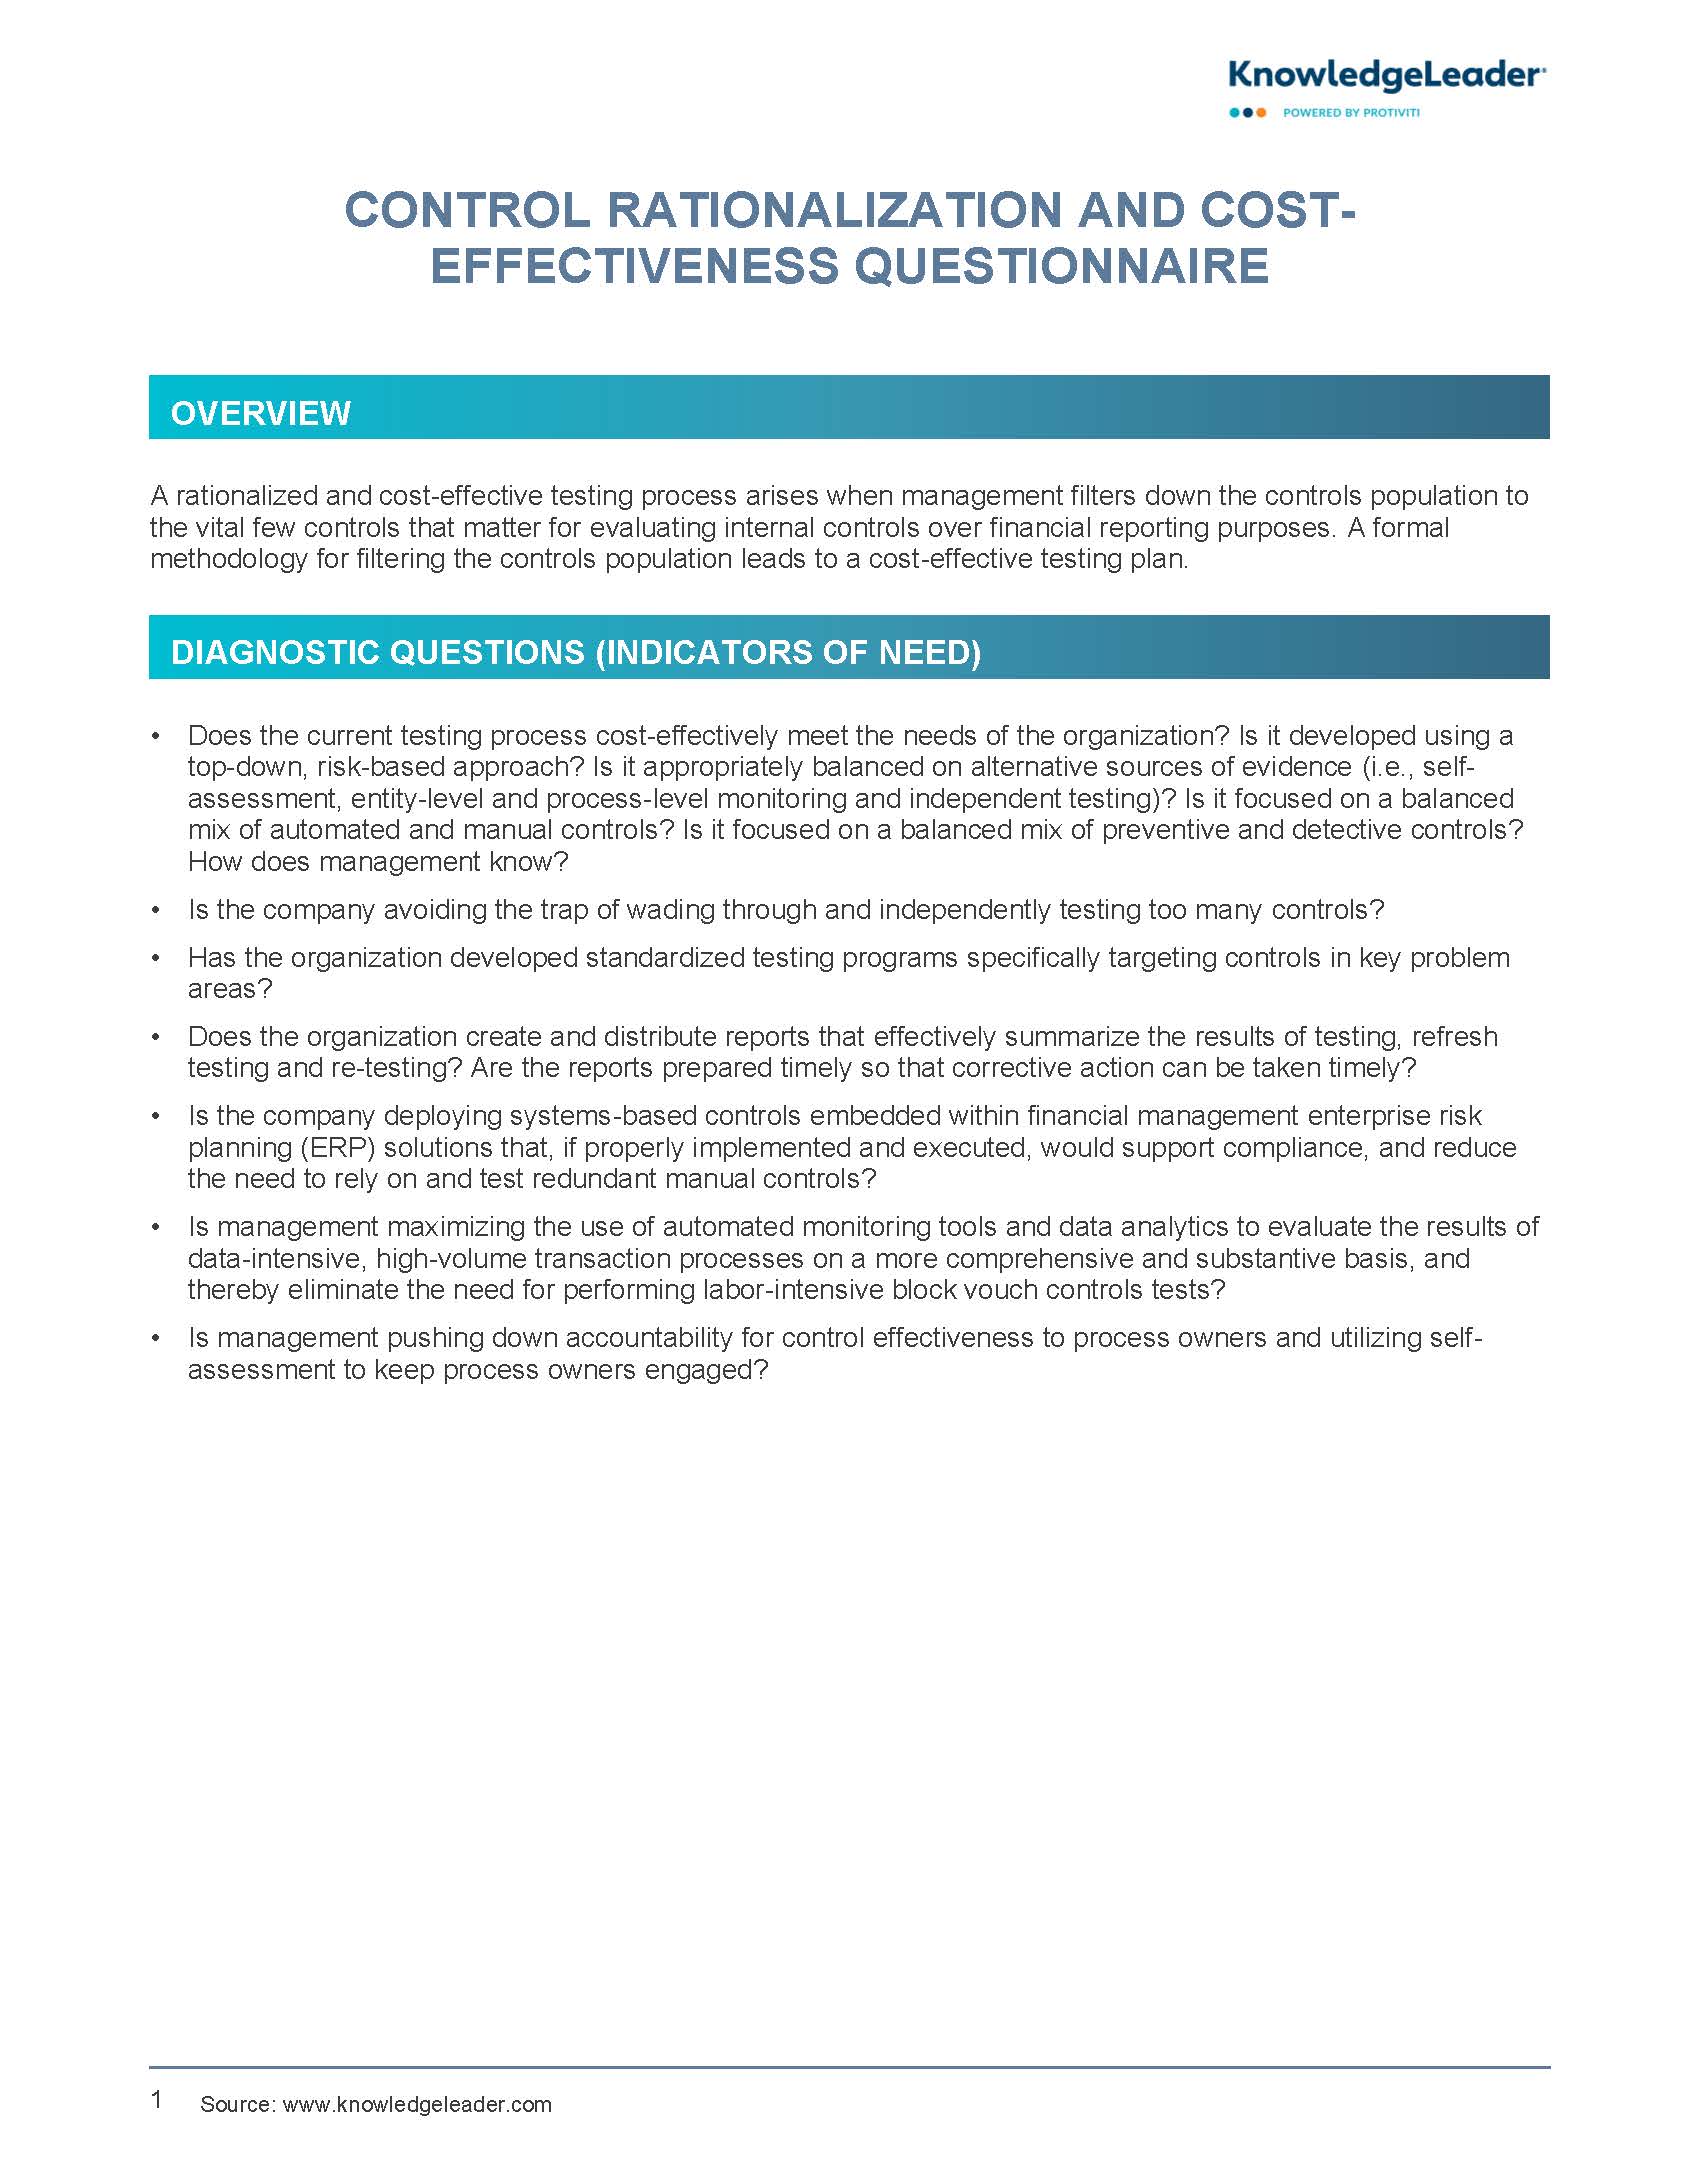 Screenshot of the first page of Control Rationalization and Cost-Effectiveness Questionnaire